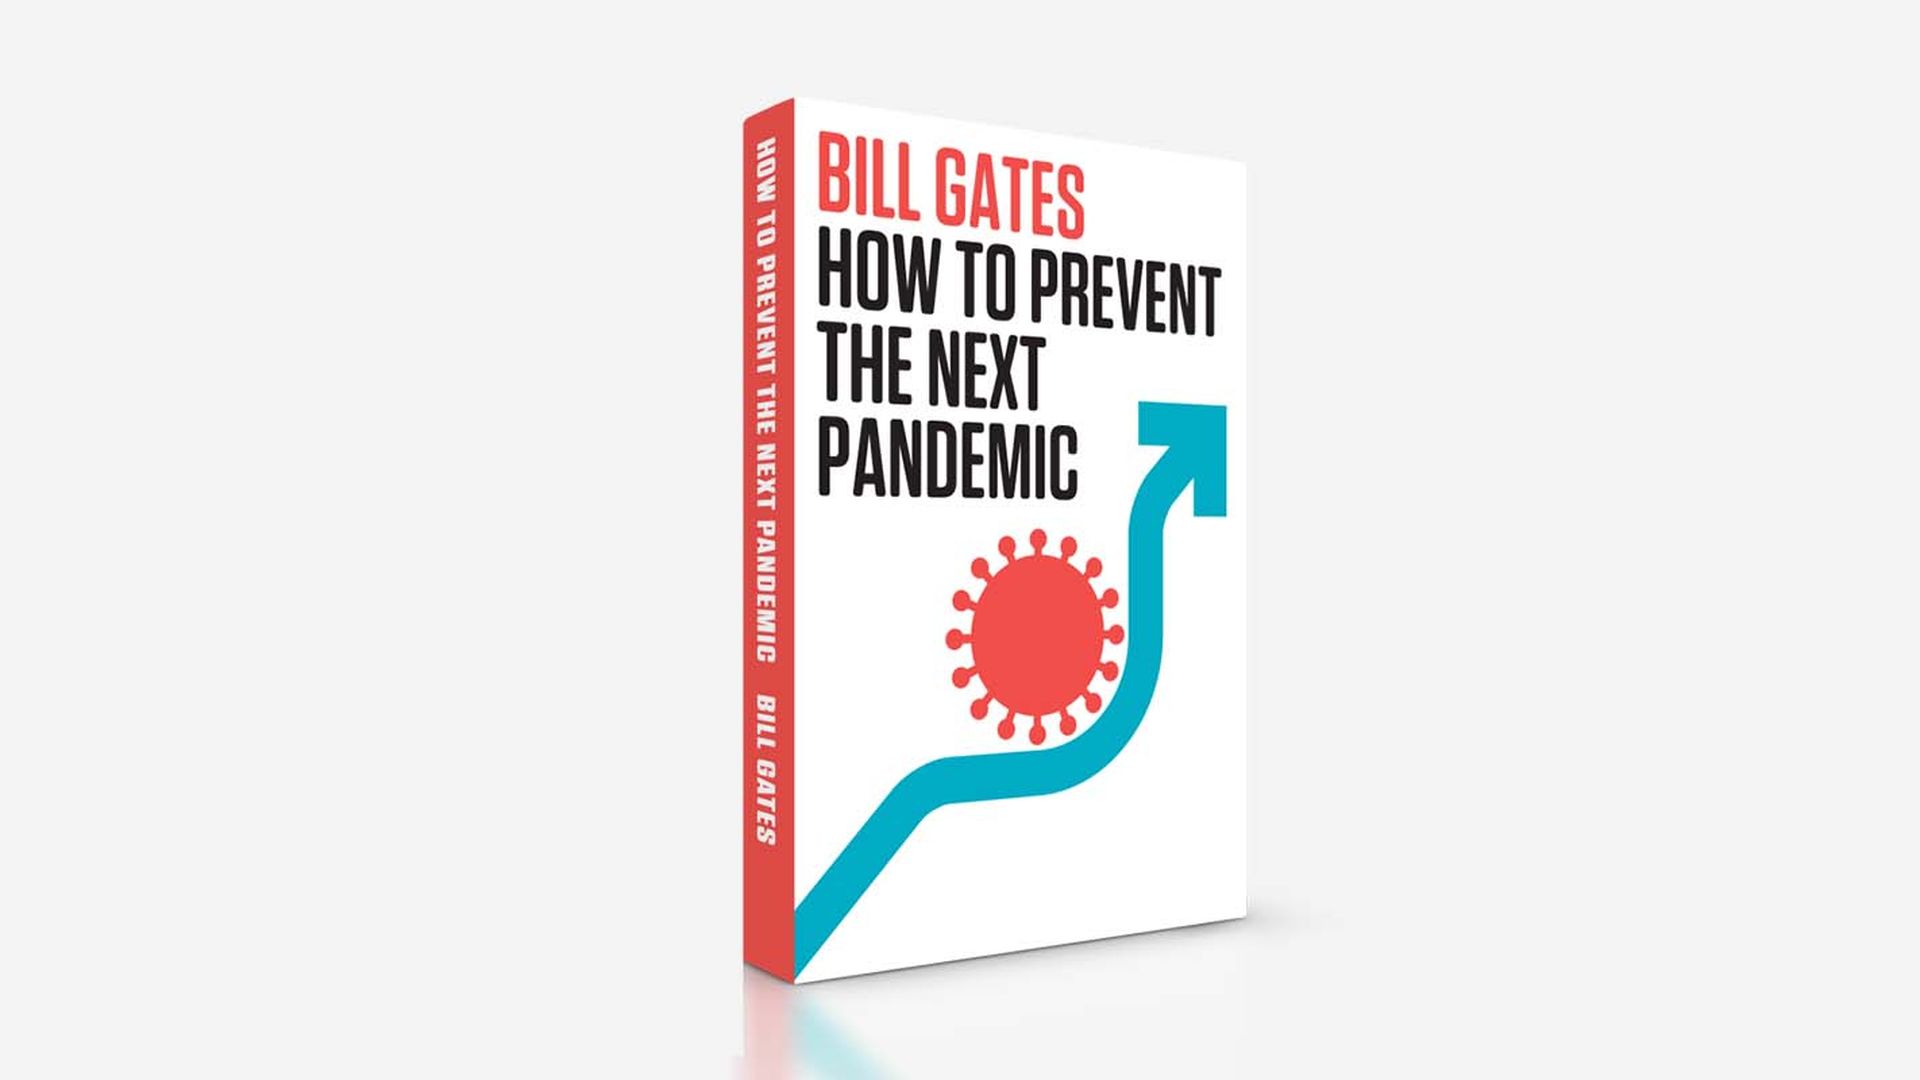 Book cover for Bill Gates' book: How to prevent the next pandemic.